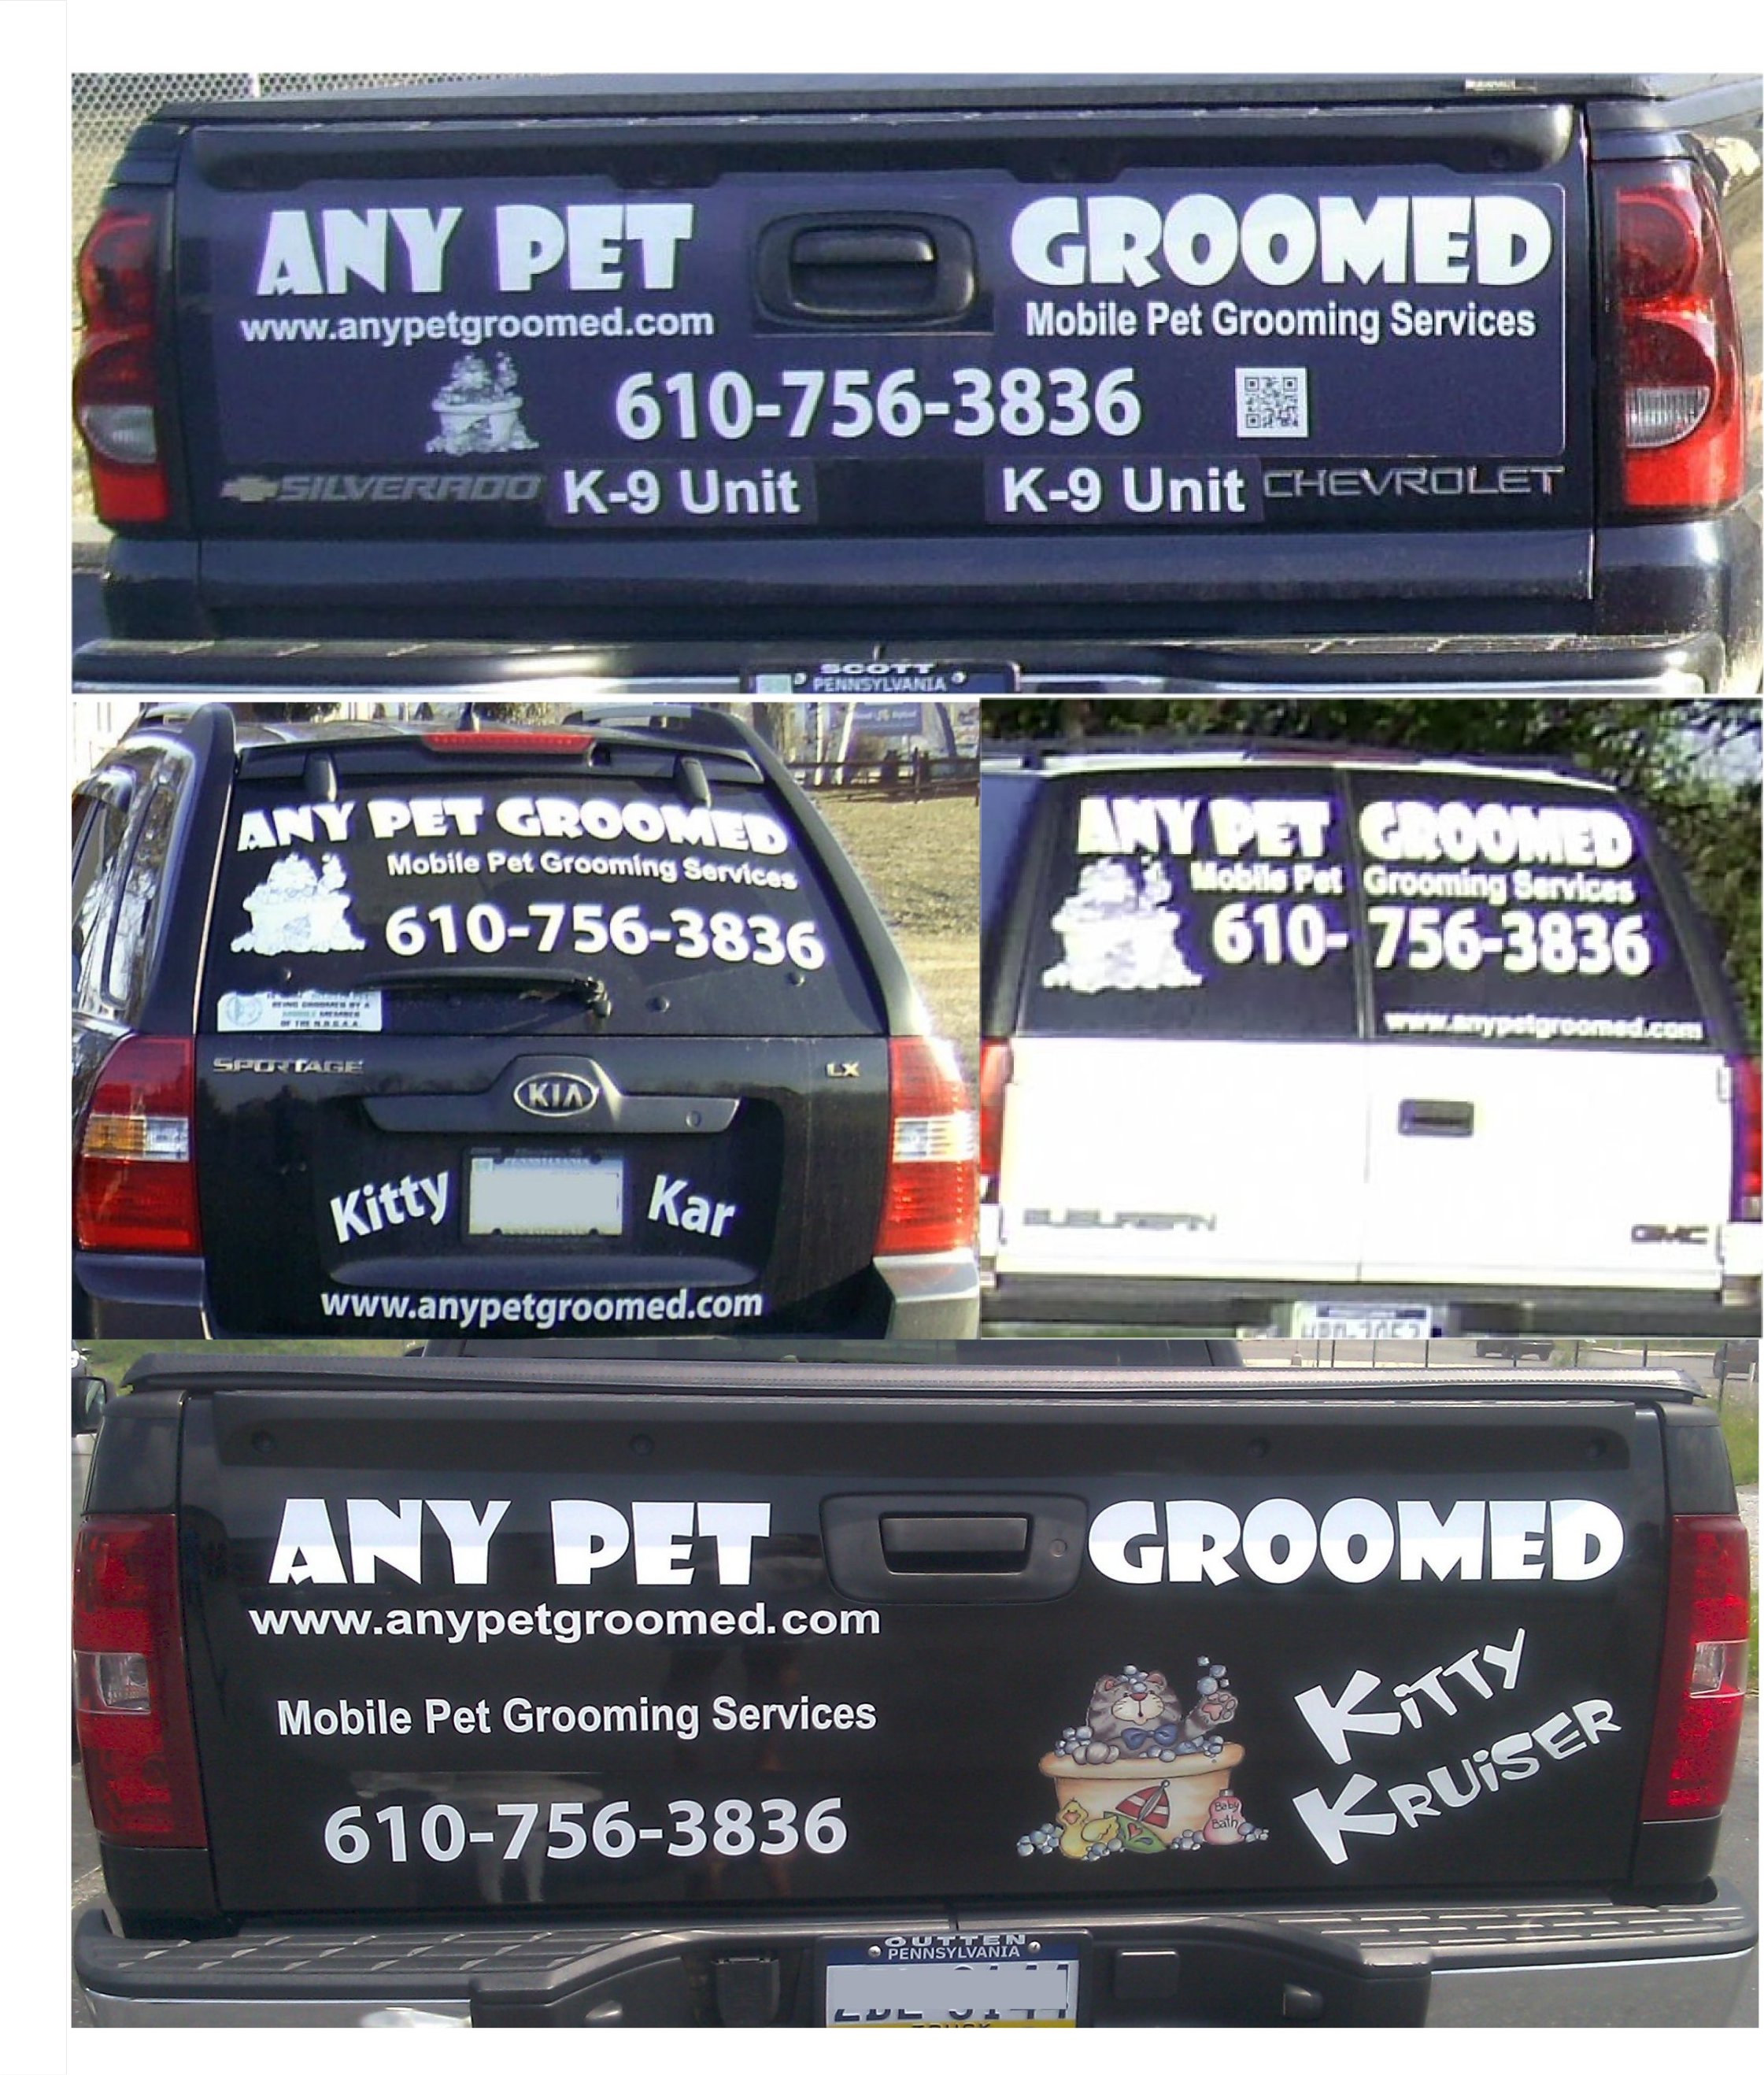 at home mobile pet grooming